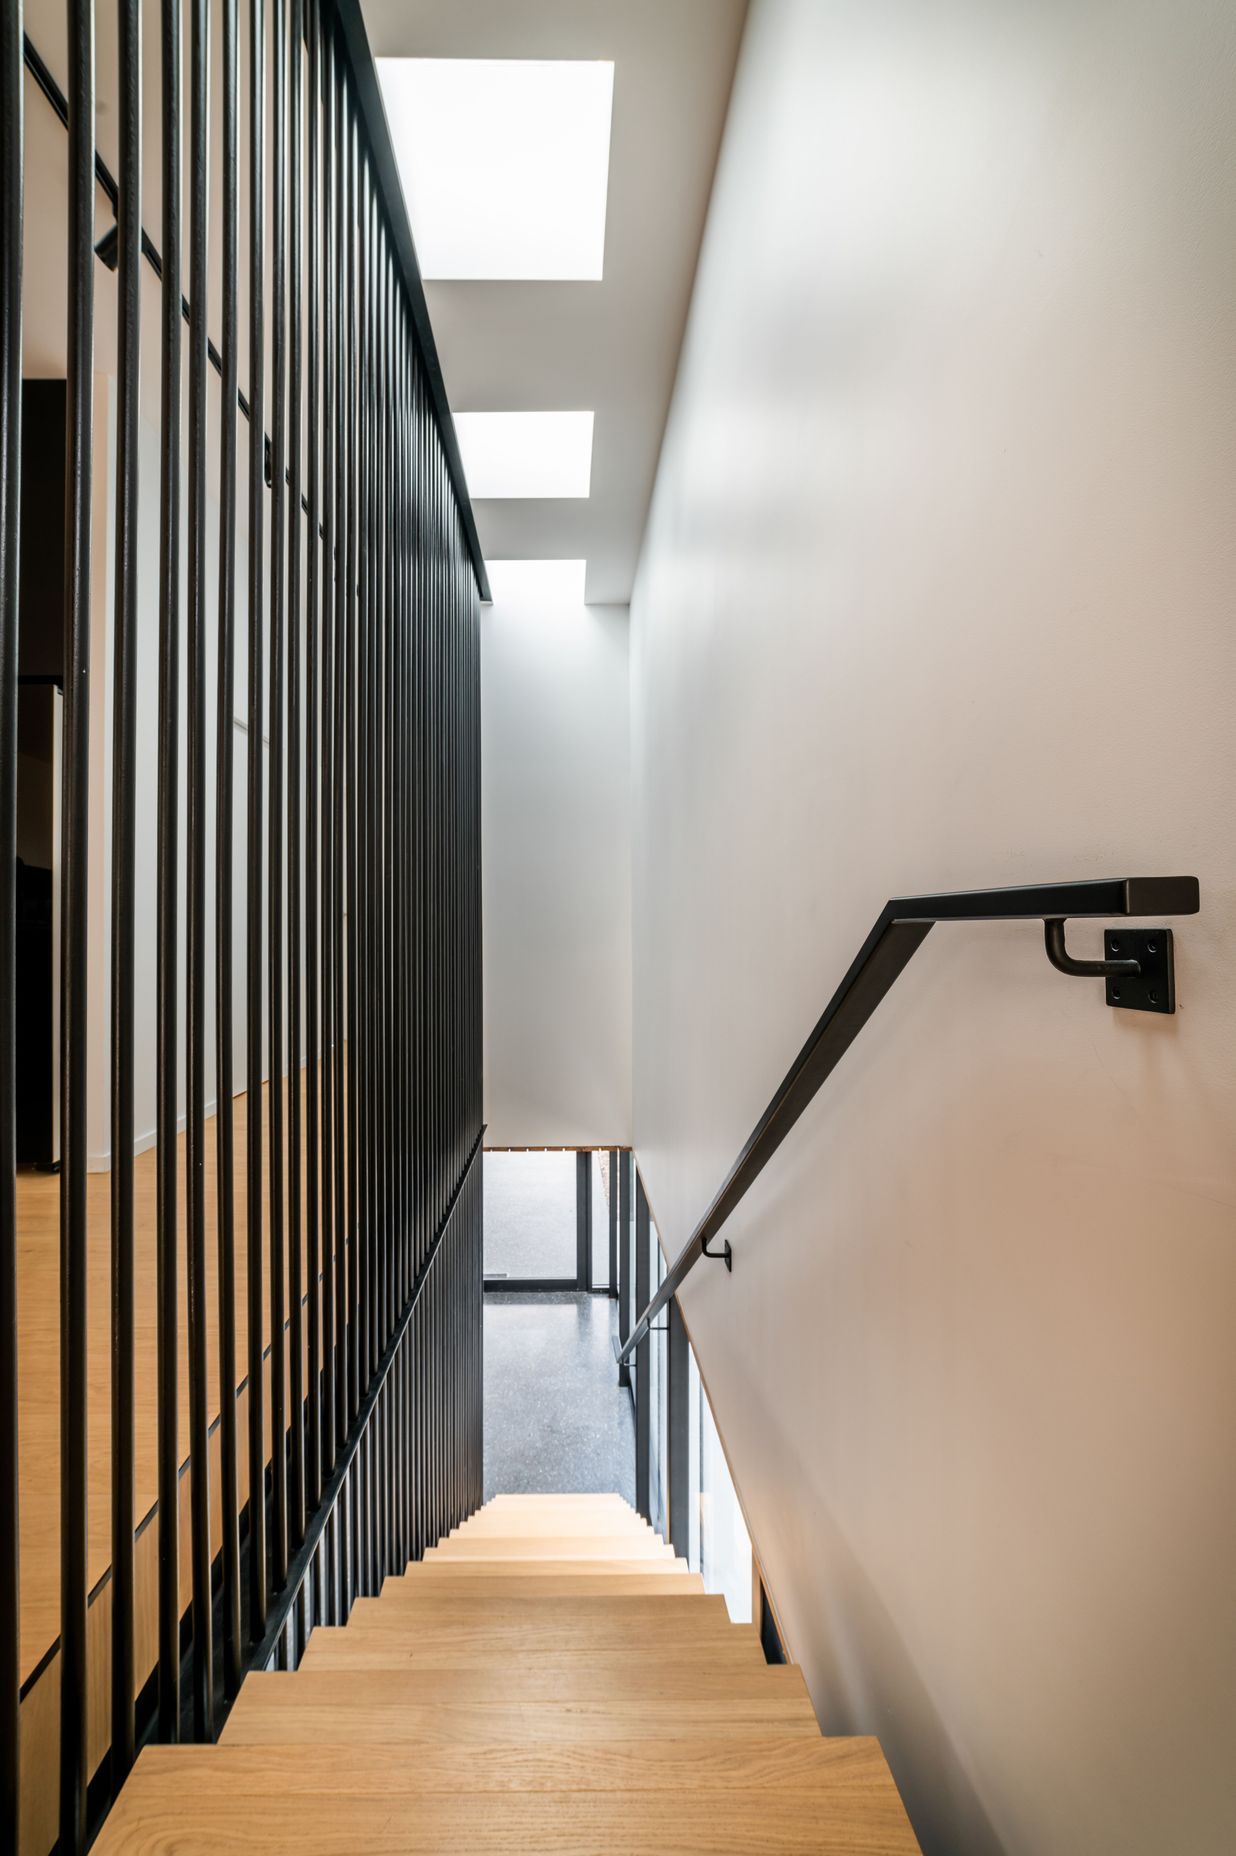 The verticality of the black steel balustrade works to draw visitors up to the main living area.